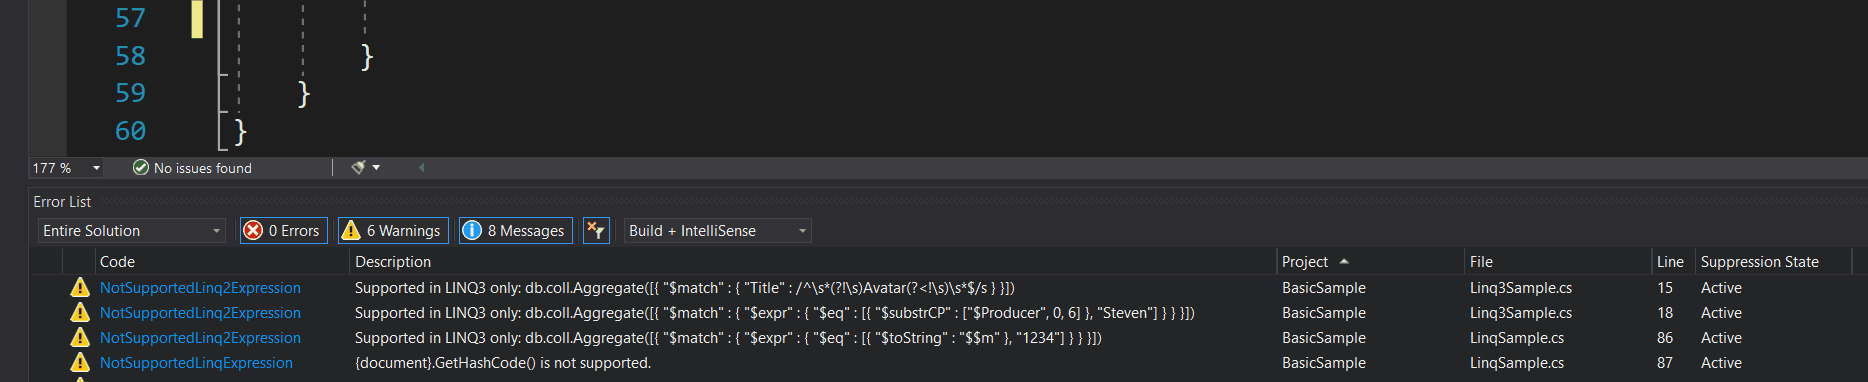 GIF showing unsupported builder expression being implemented. After being written, unsupported code is correctly highlighted; tooltip is shown warning developer of the unsupported expression and the warning is added to the Error List panel of the IDE.